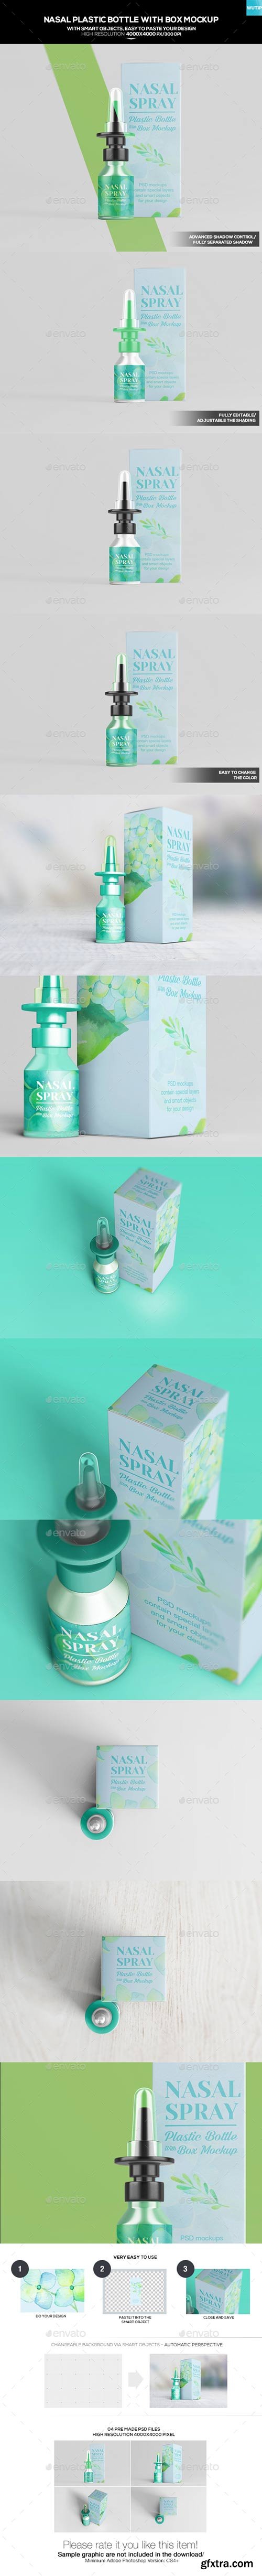 Graphicriver - Nasal Plastic Bottle With Box Mockup 20254776